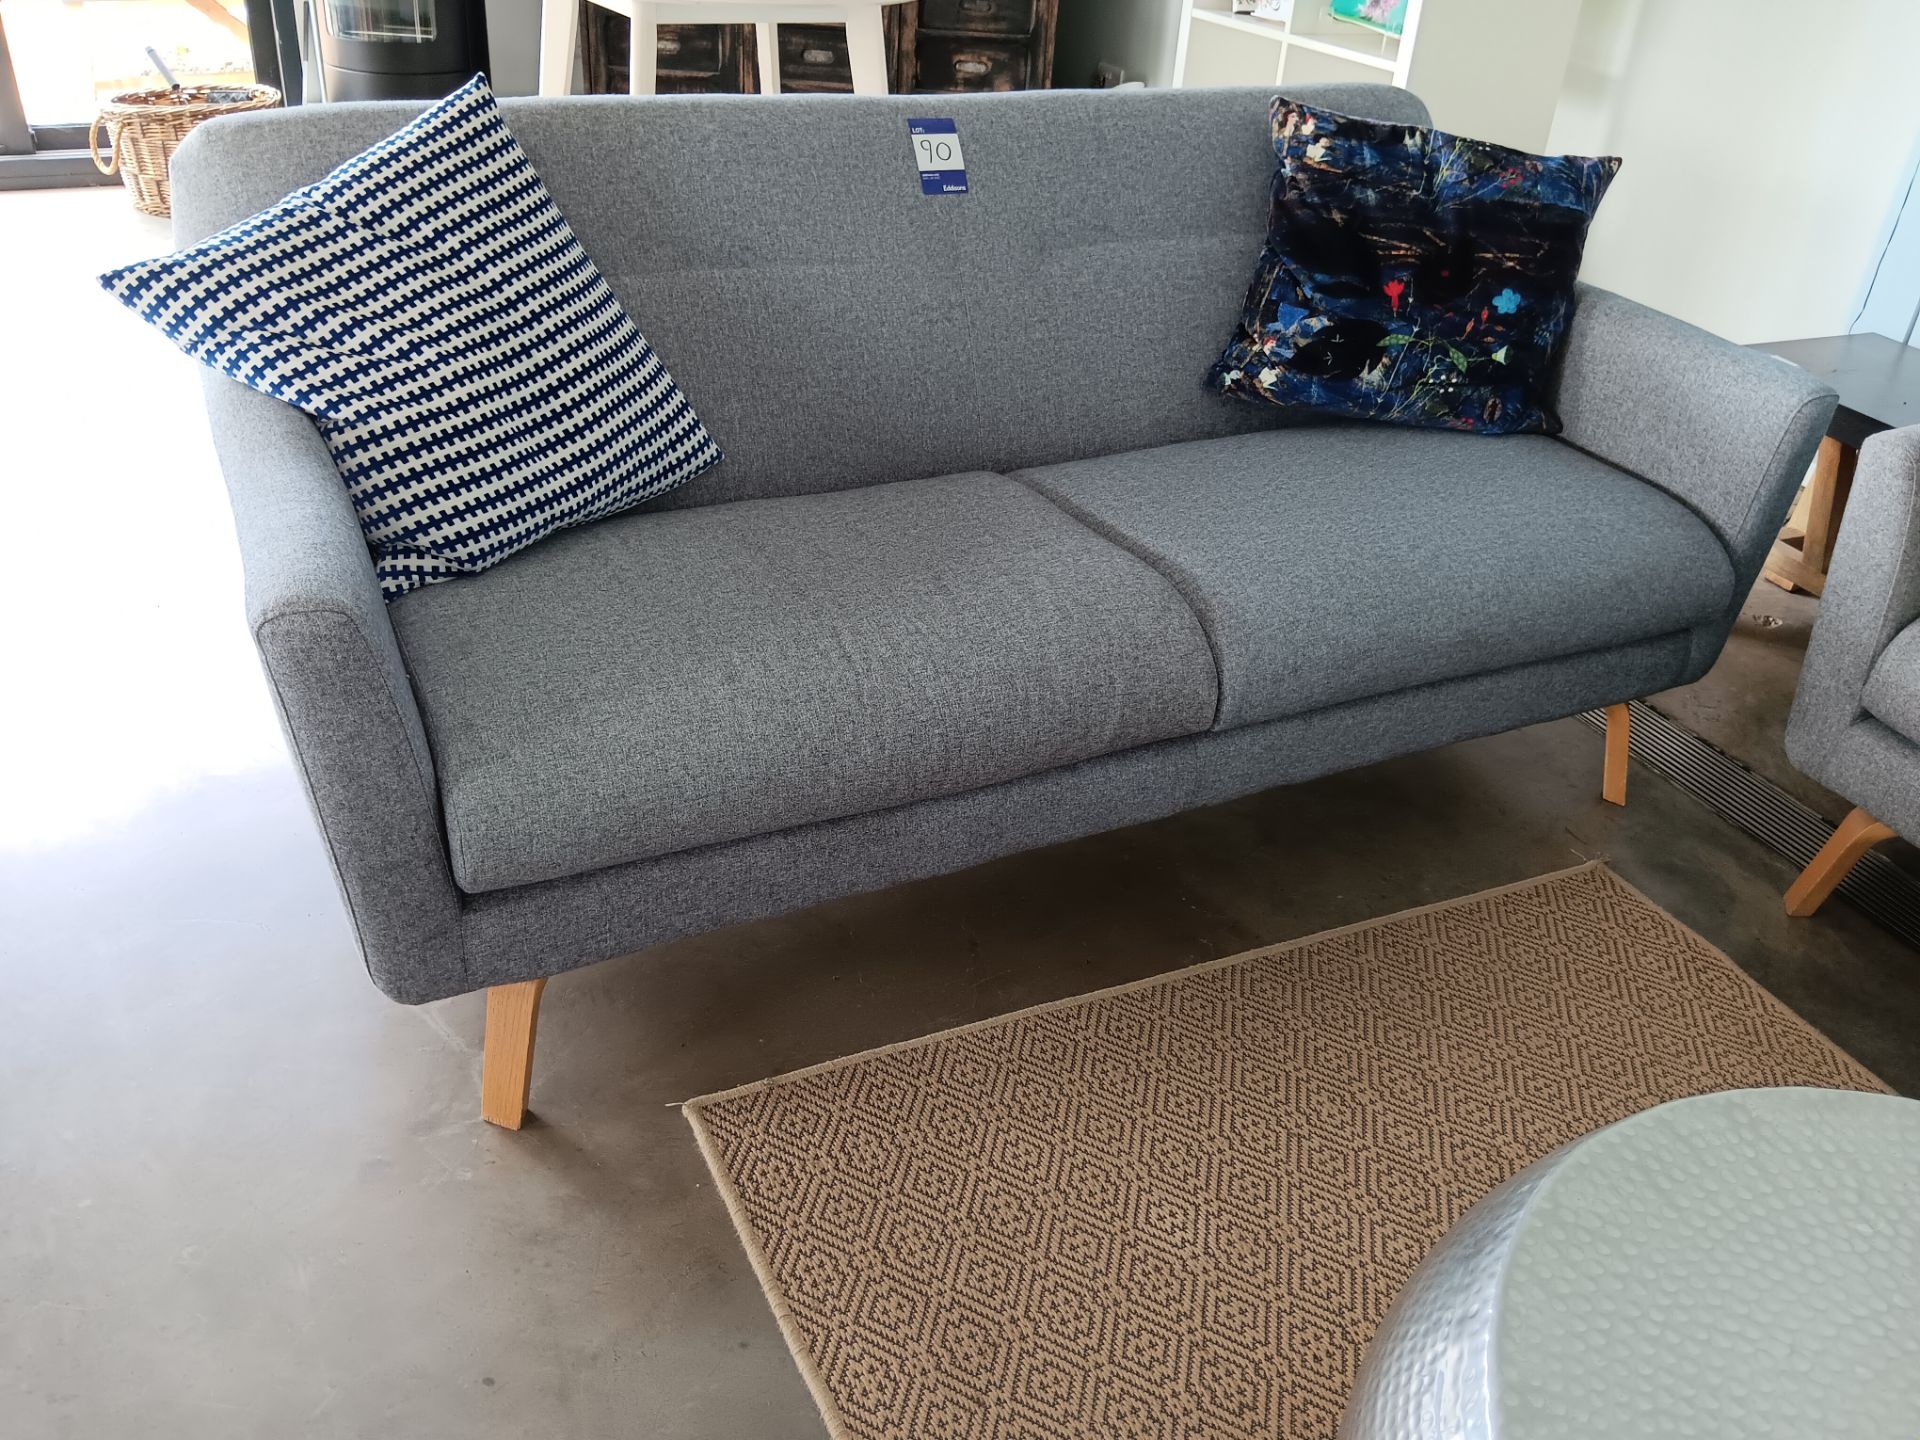 Two seat sofa with grey cloth upholstery